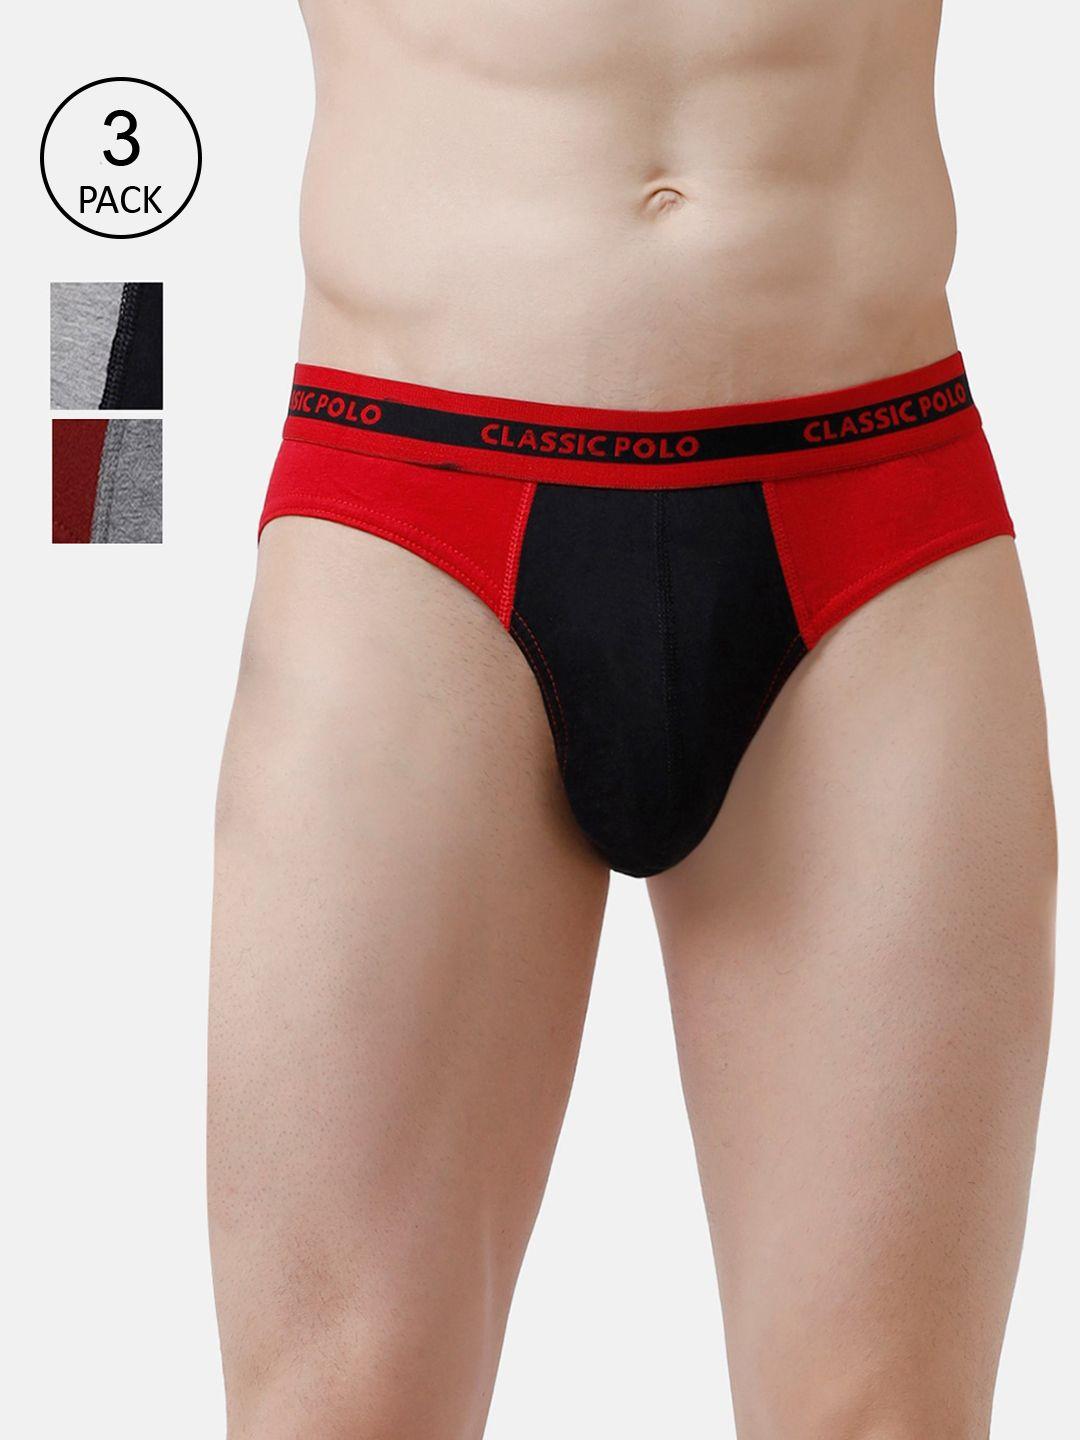 classic polo men pack of 3 red, grey & black colour blocked cotton basic briefs